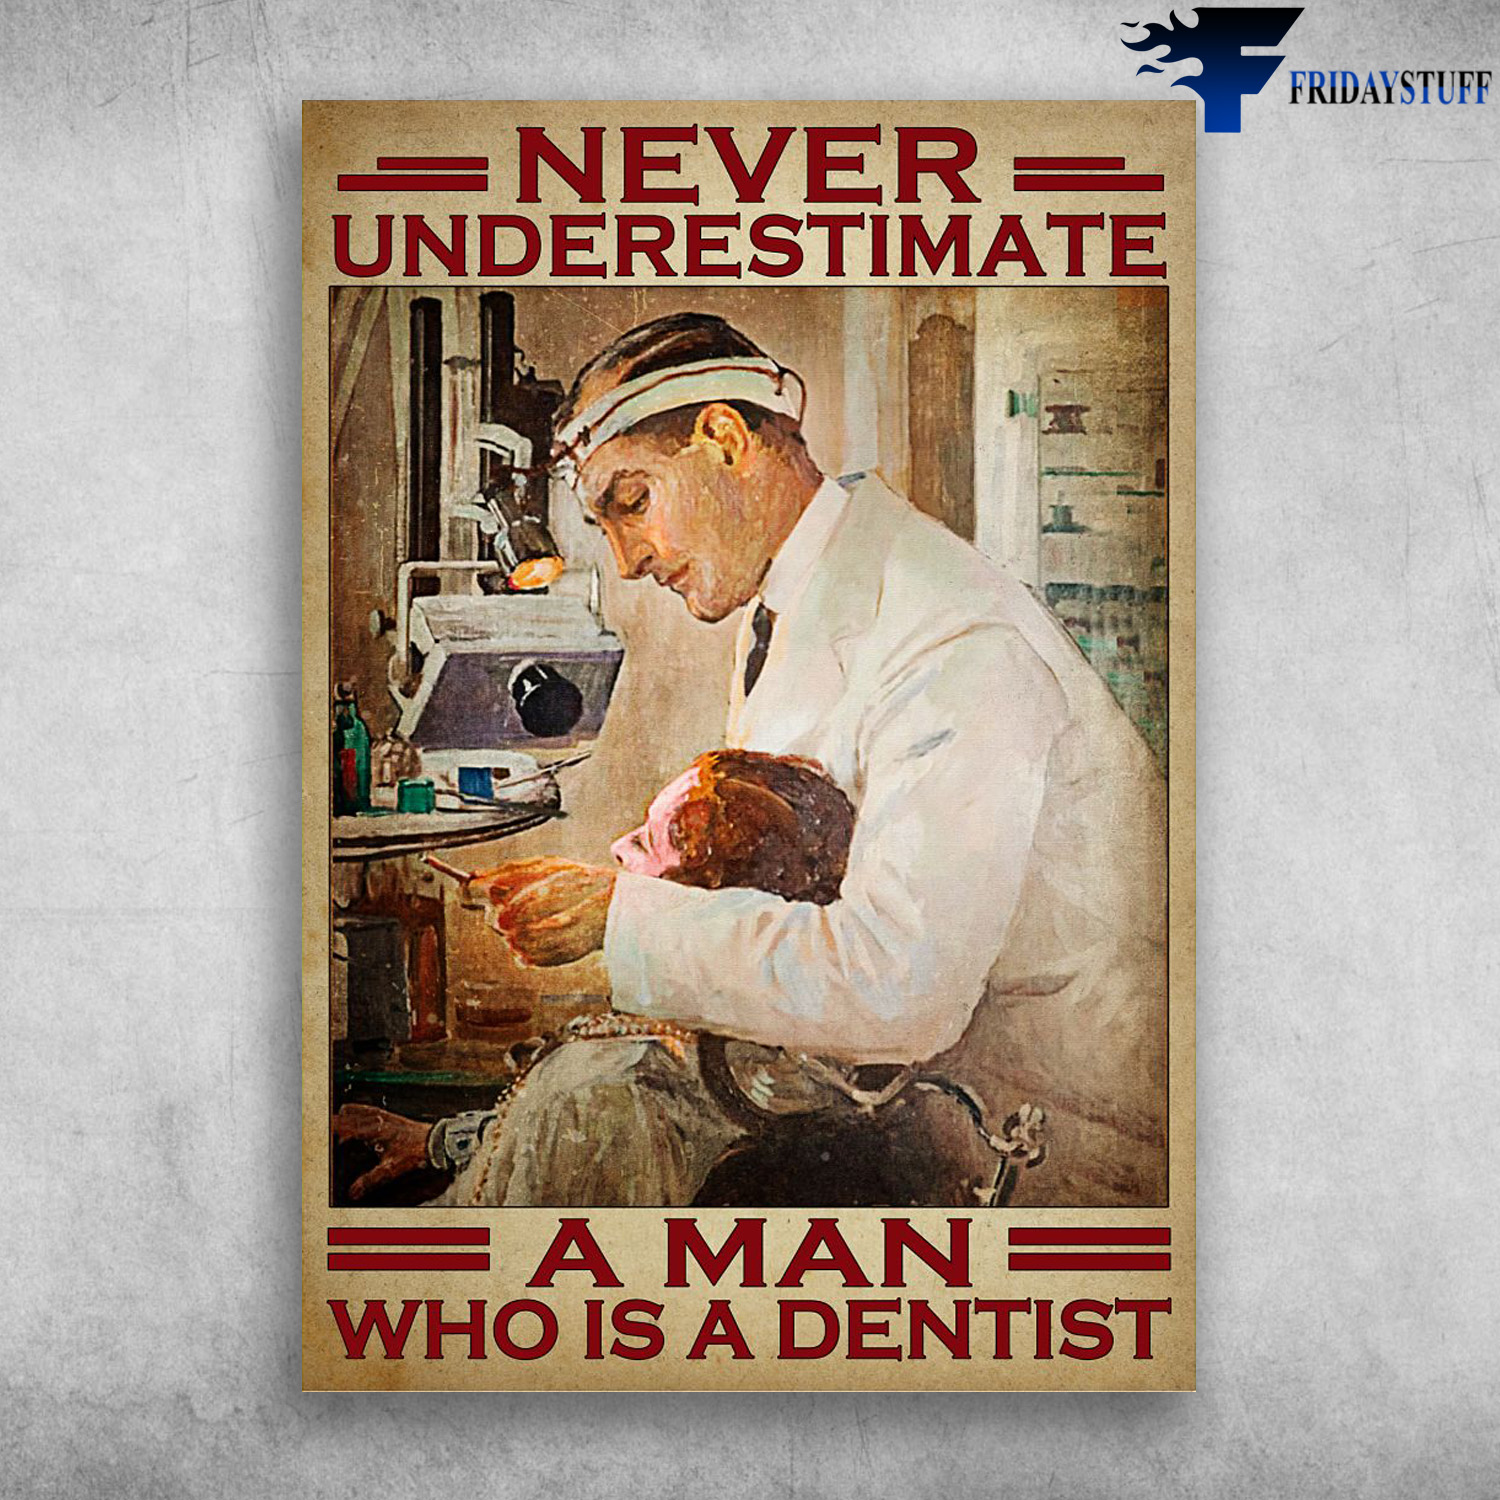 Dentist Man - Never Underestimate A Man, Who Is A Dentist